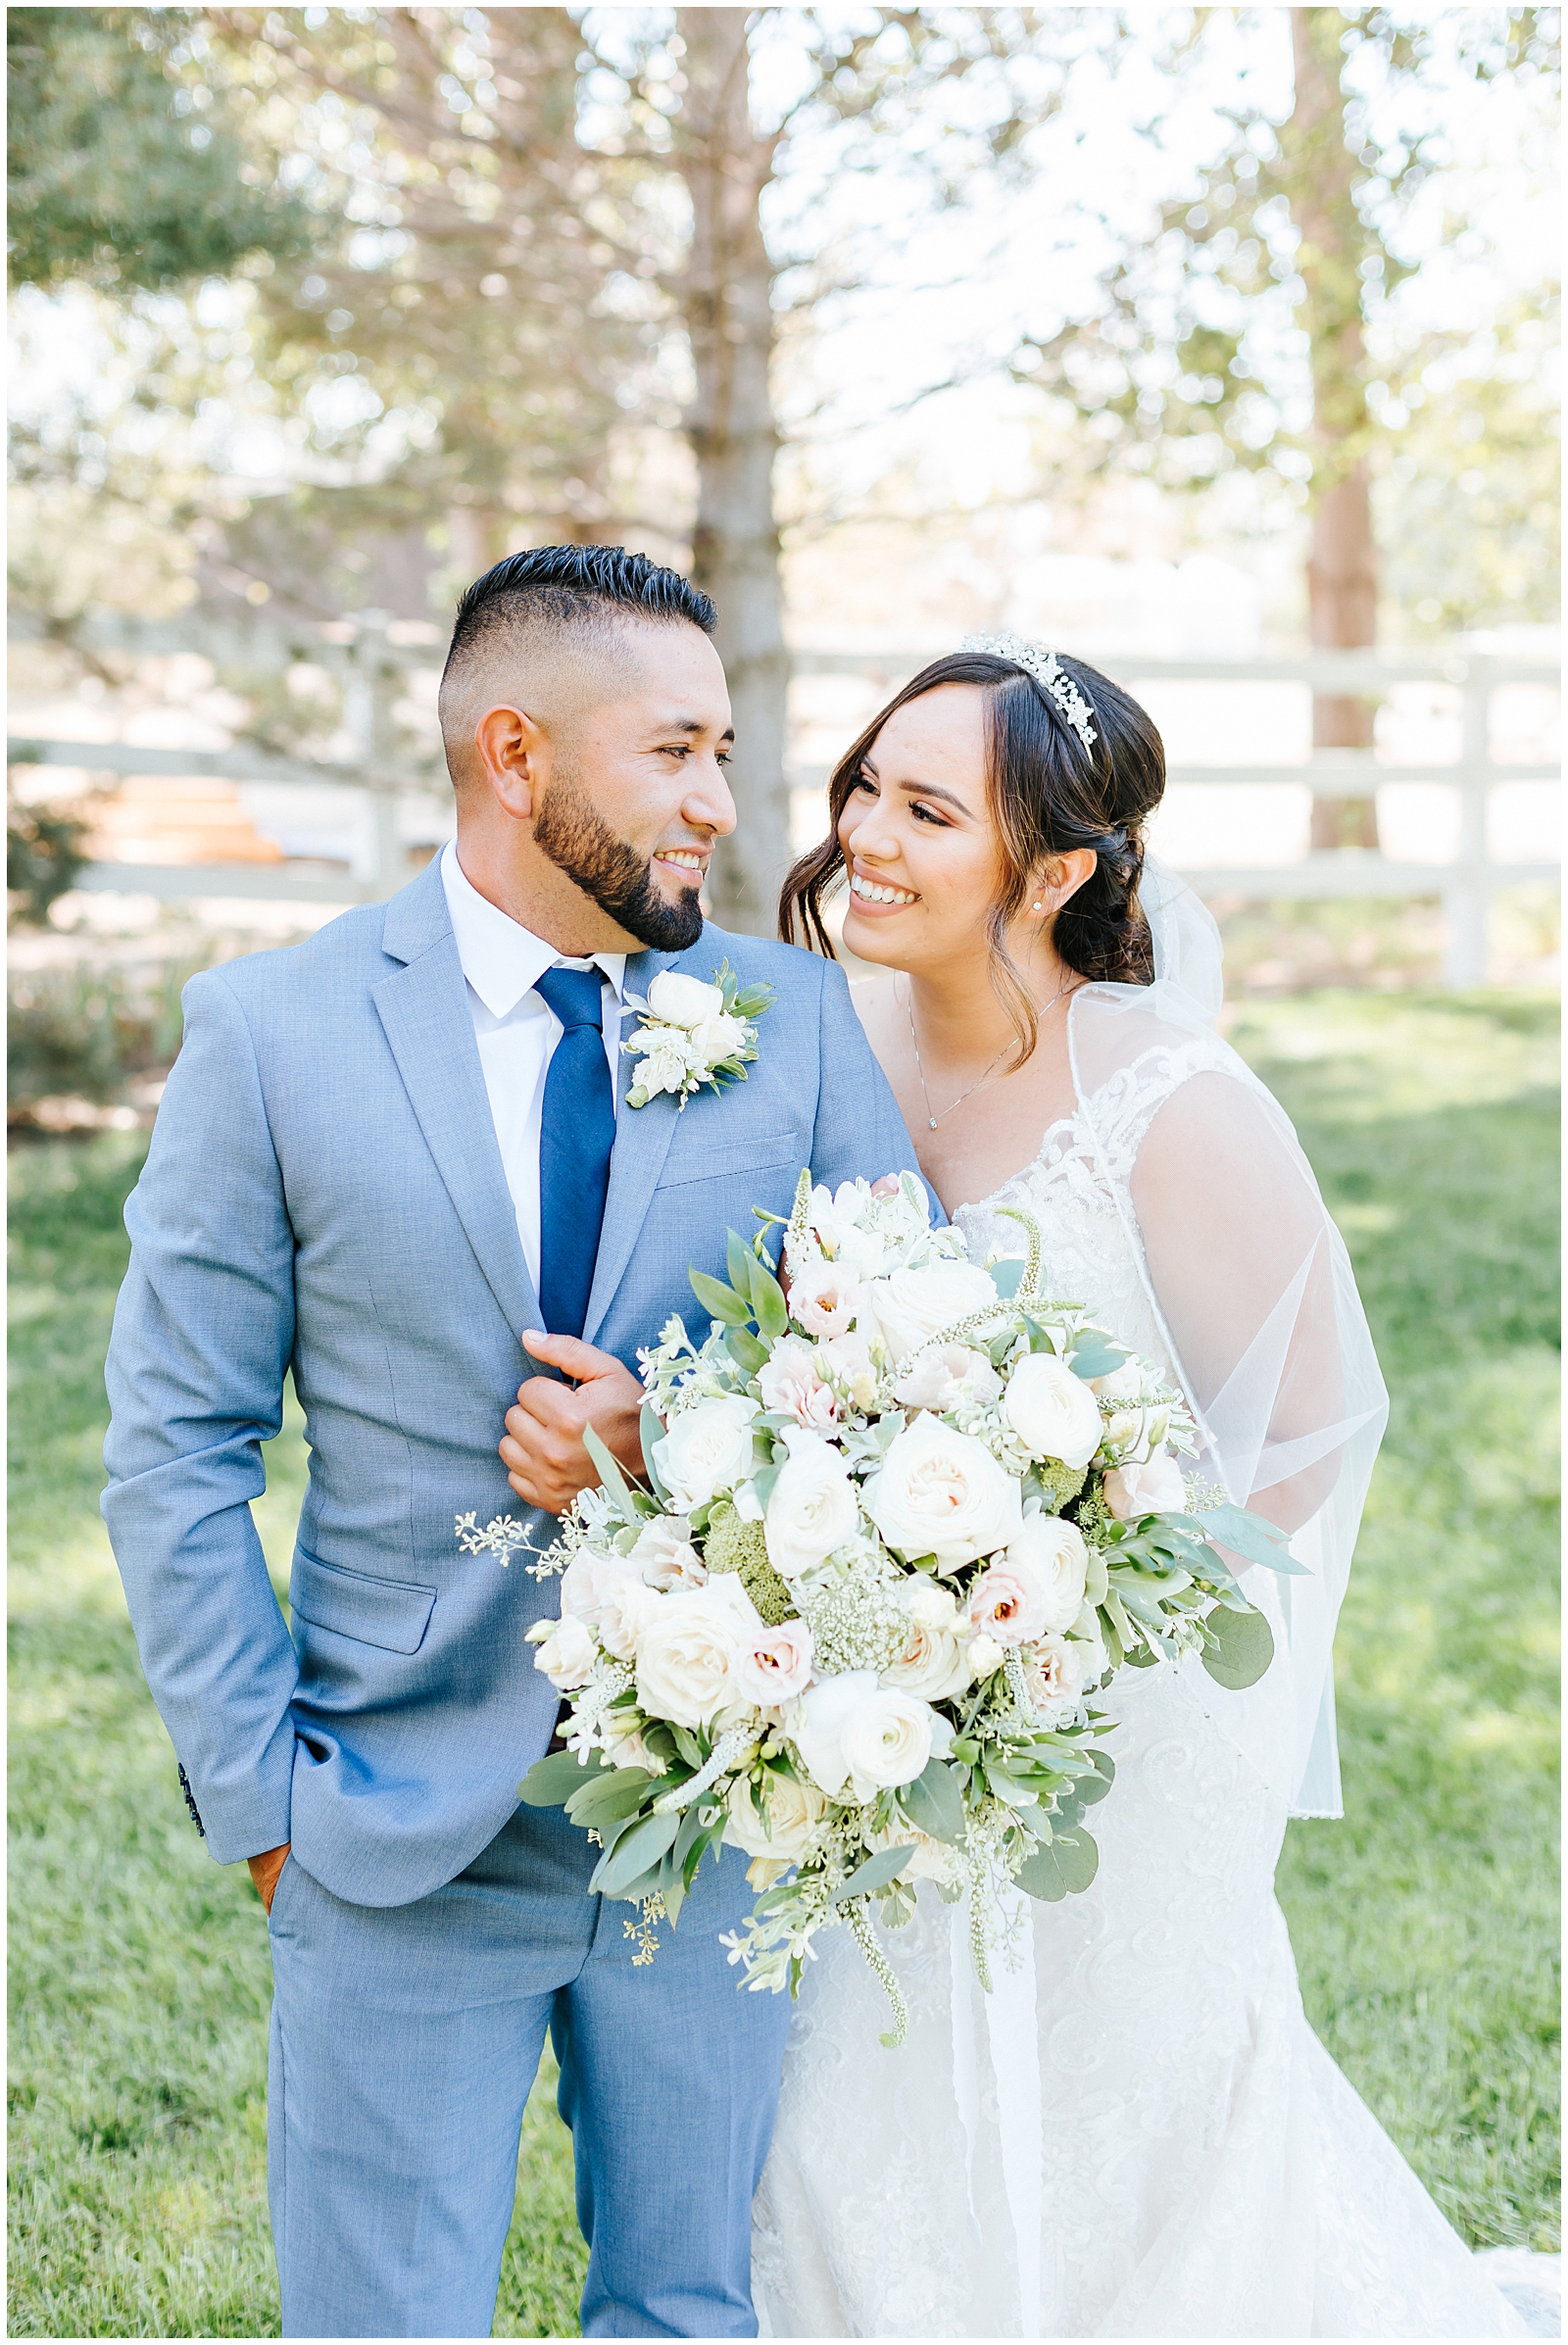 Bride and Groom Portraits at Dusty Blue Fox Canyon Vineyards Wedding